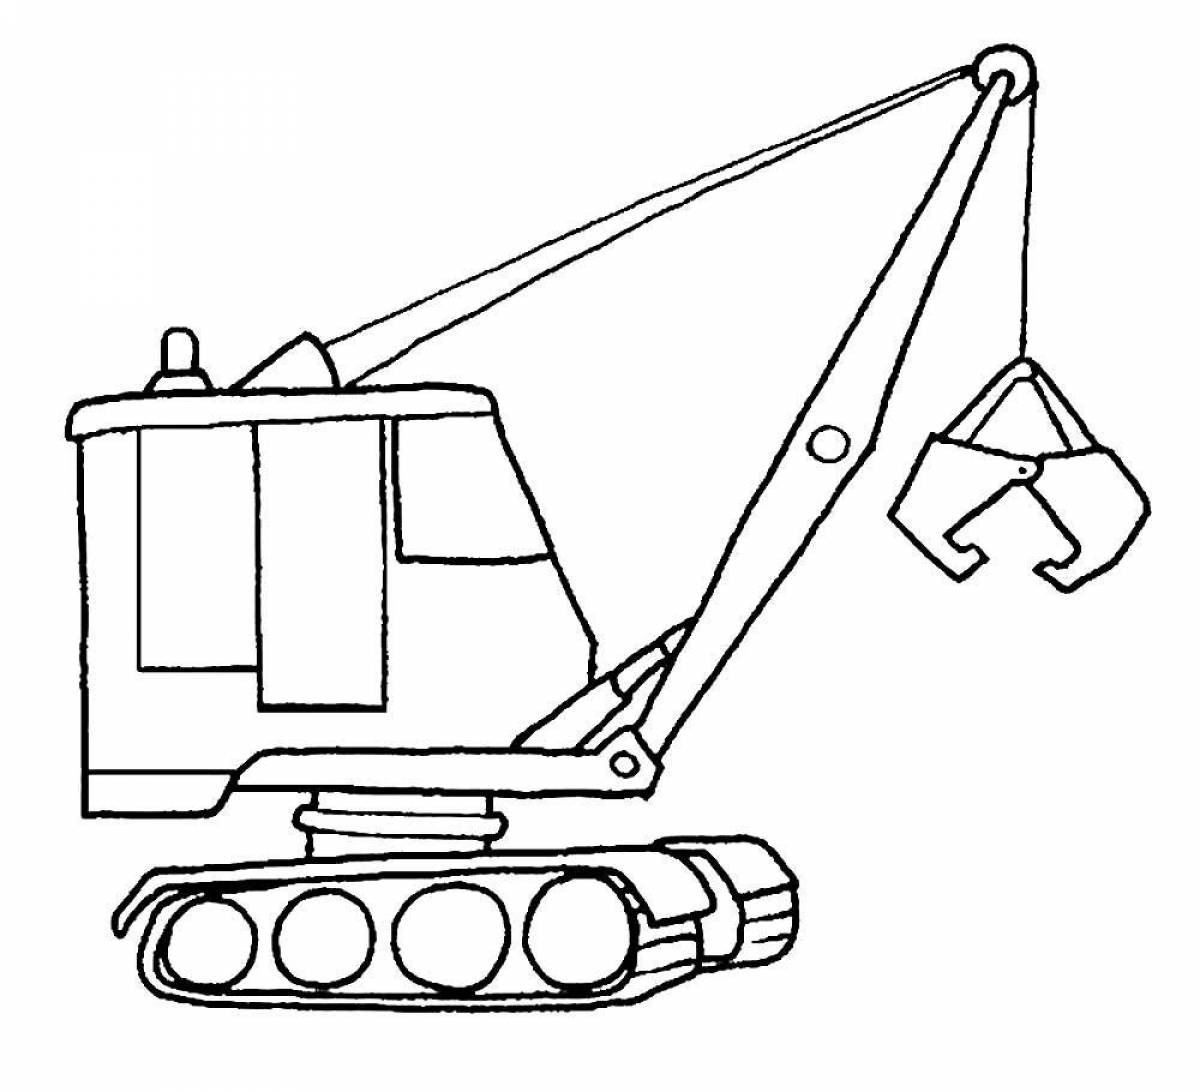 Coloring funny construction vehicles